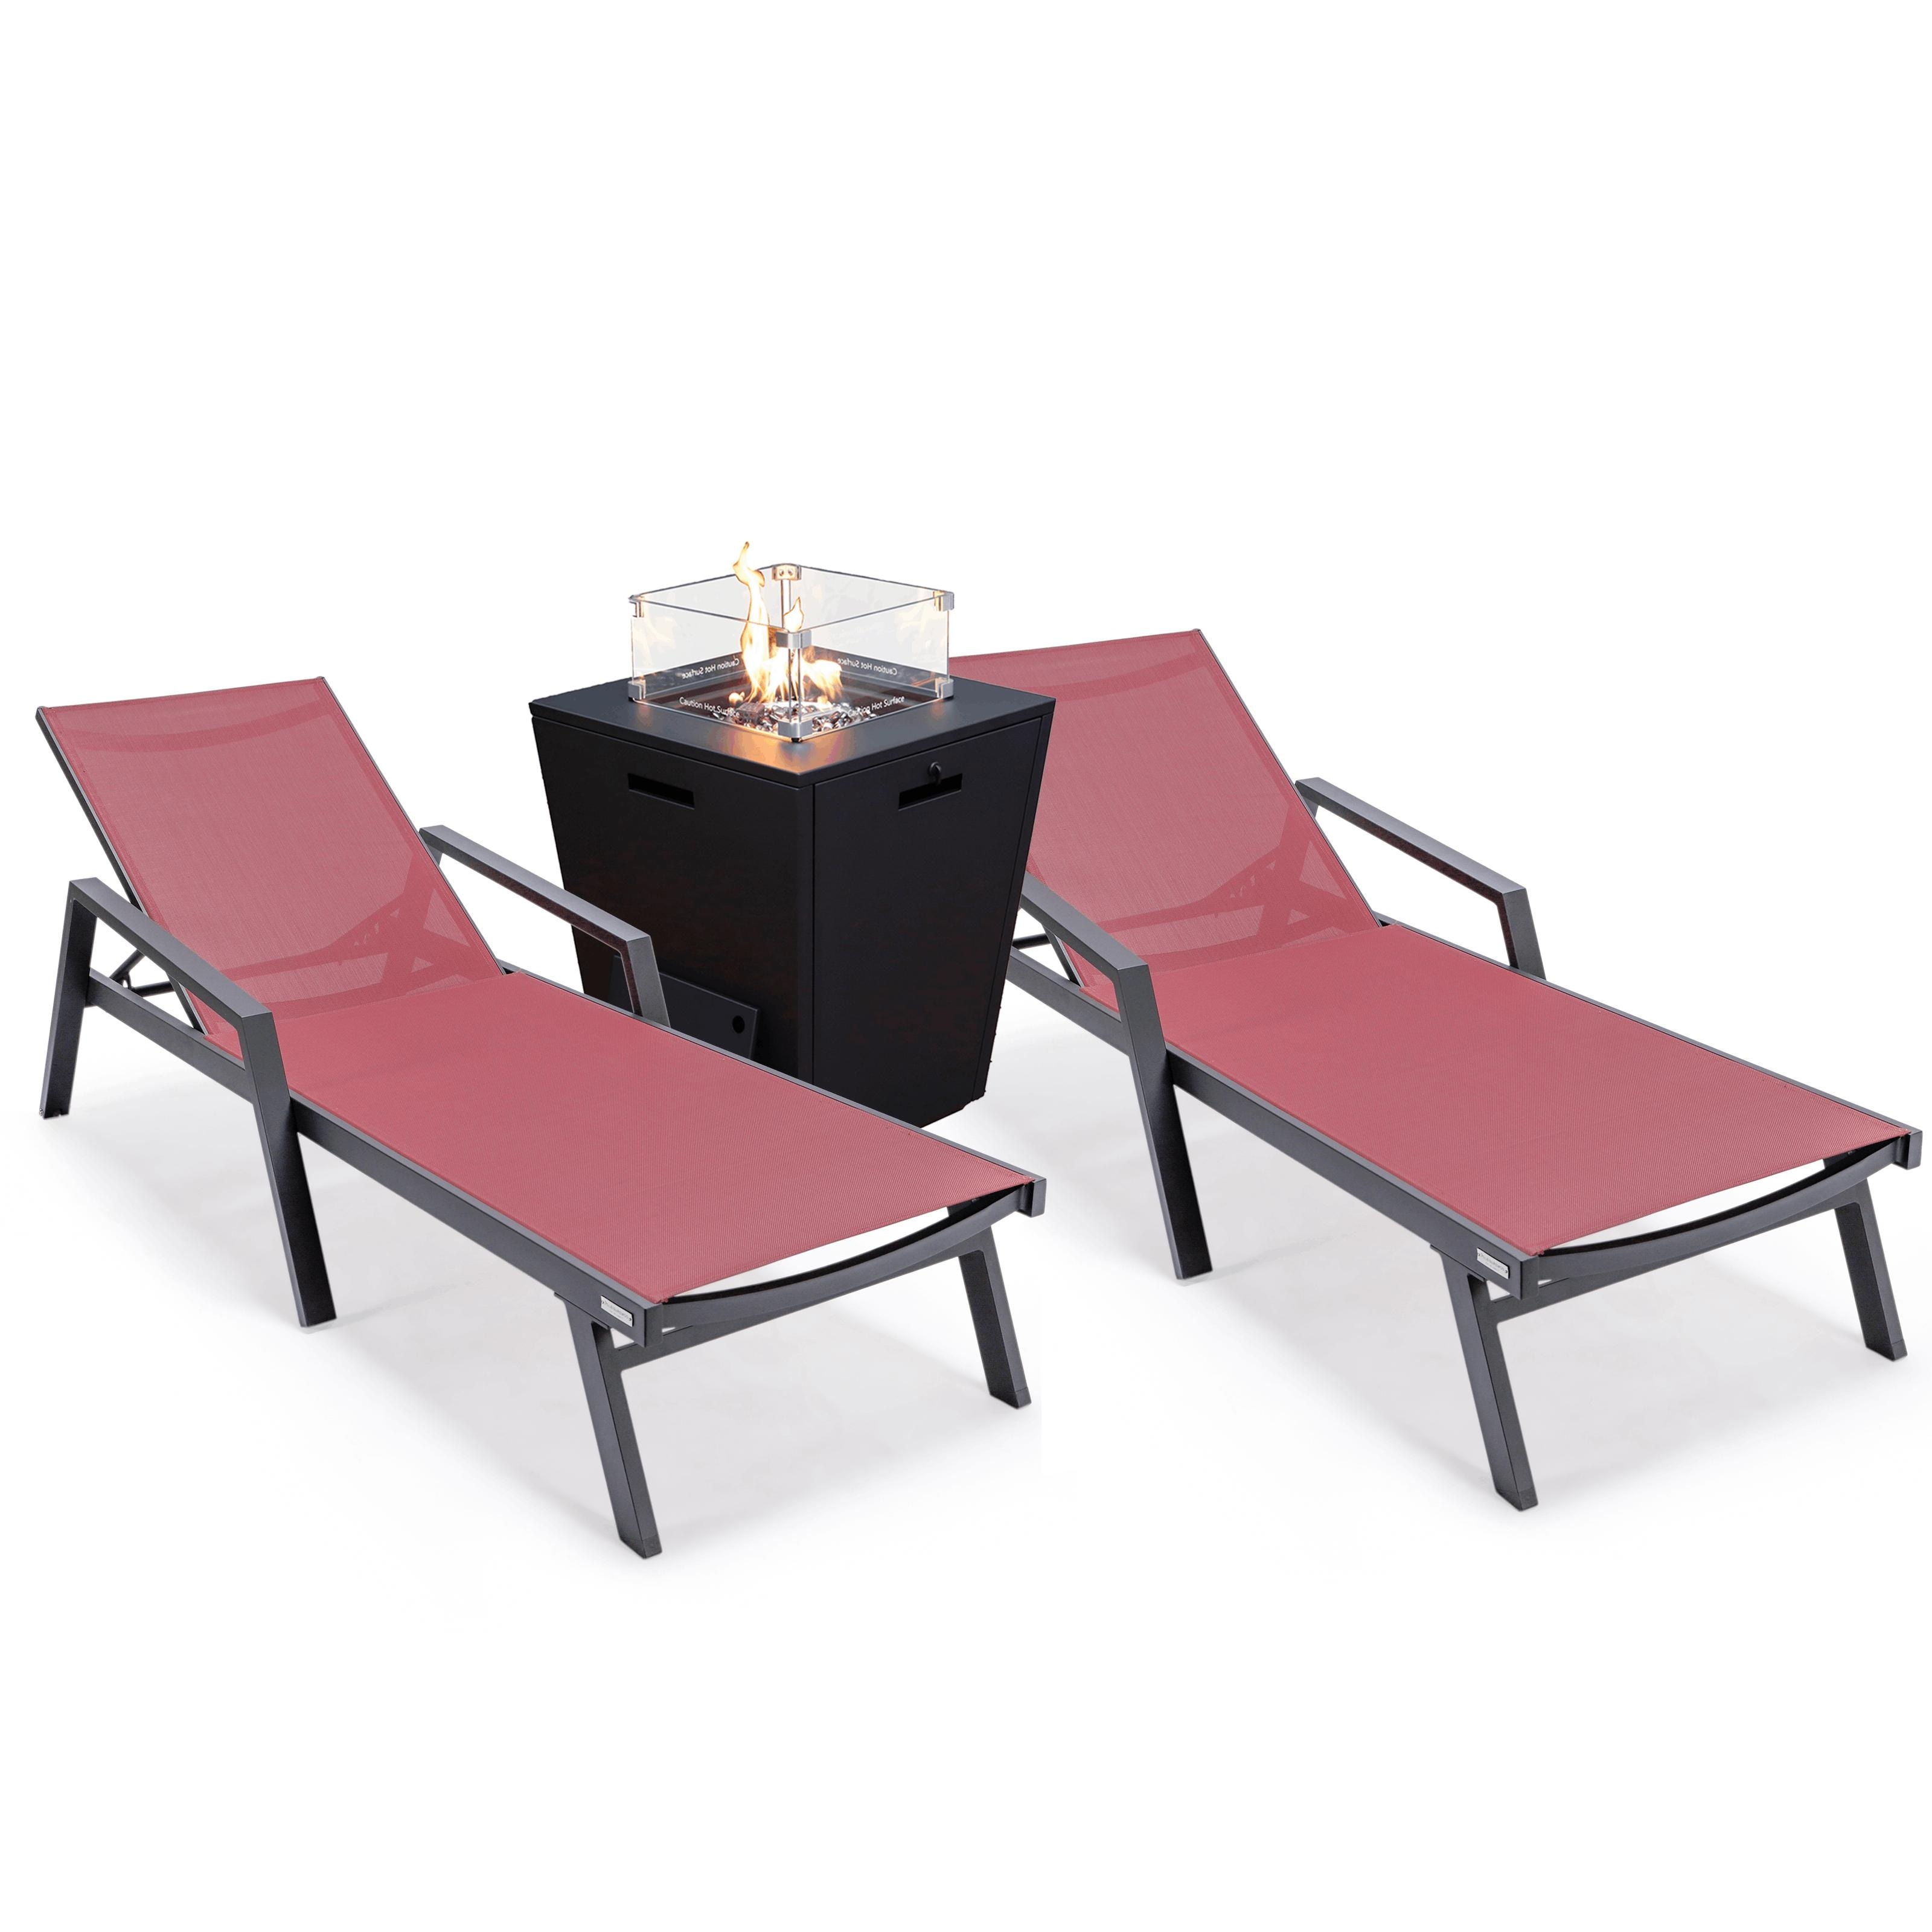 Leisuremod Marlin Chaise Lounge Chair With Arms Set Of 2 With Fire Pit Table